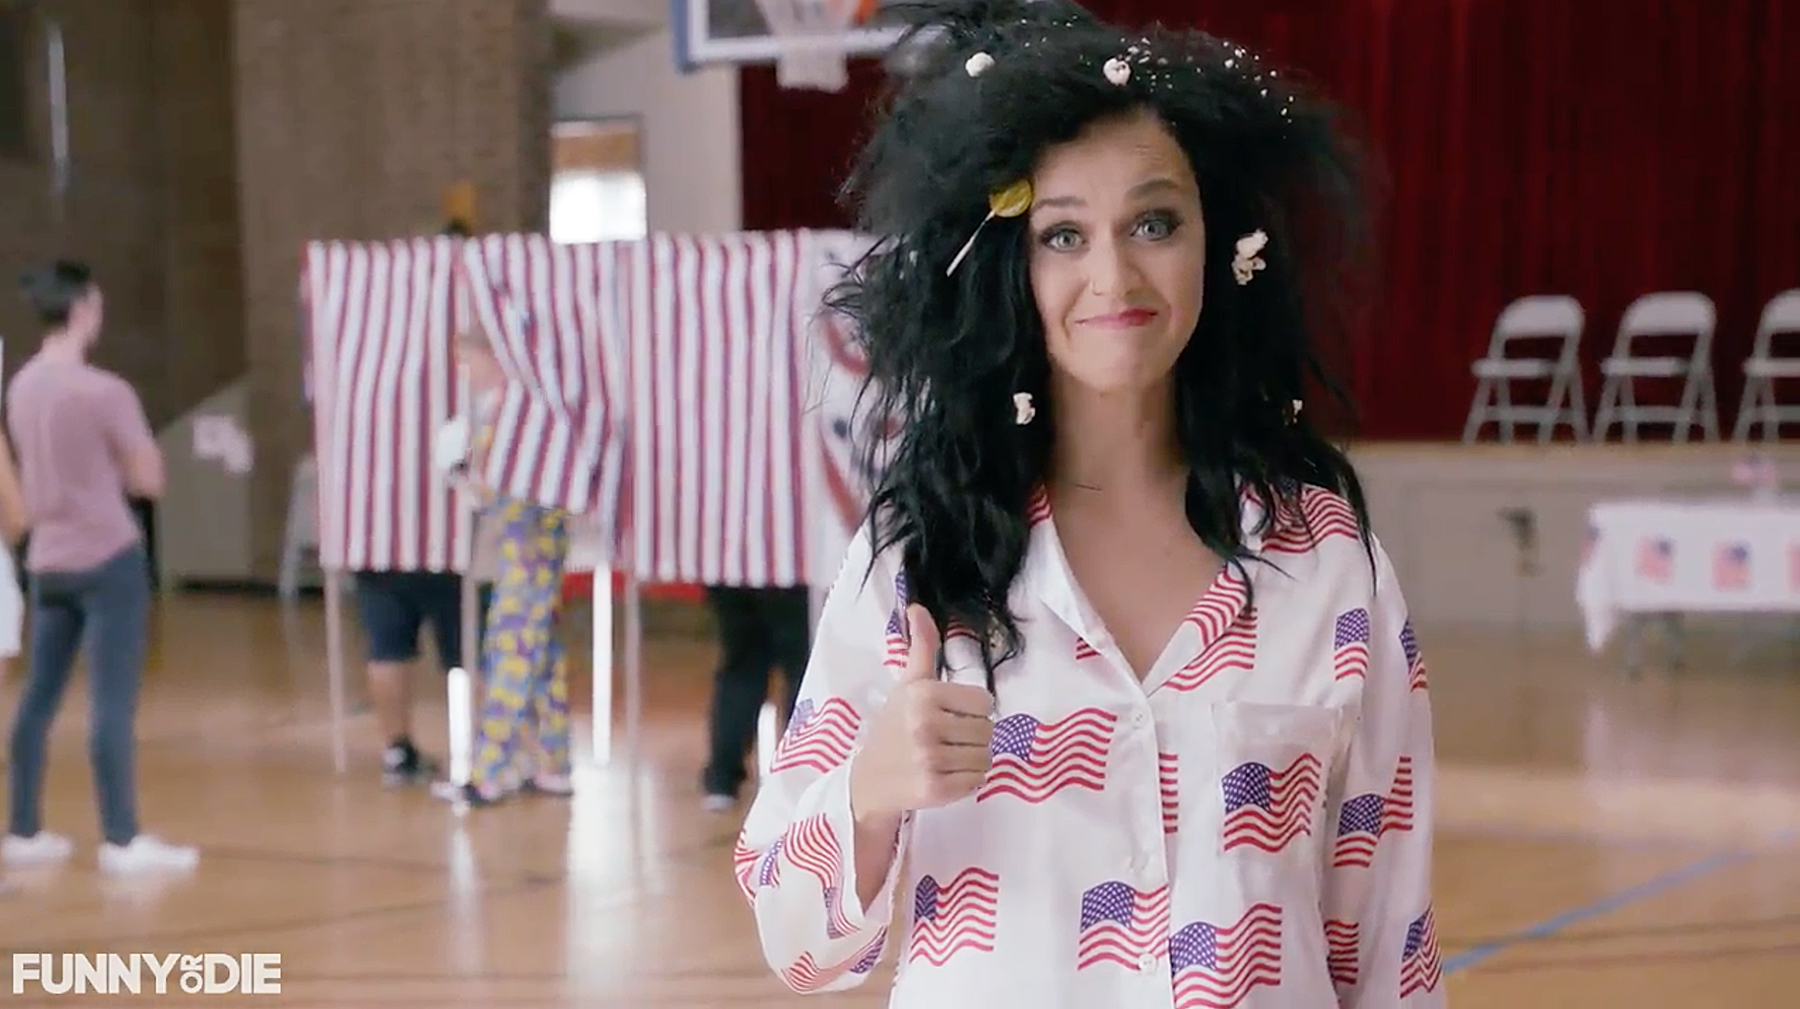 SEE IT: Katy Perry strips naked to urge people to vote on 